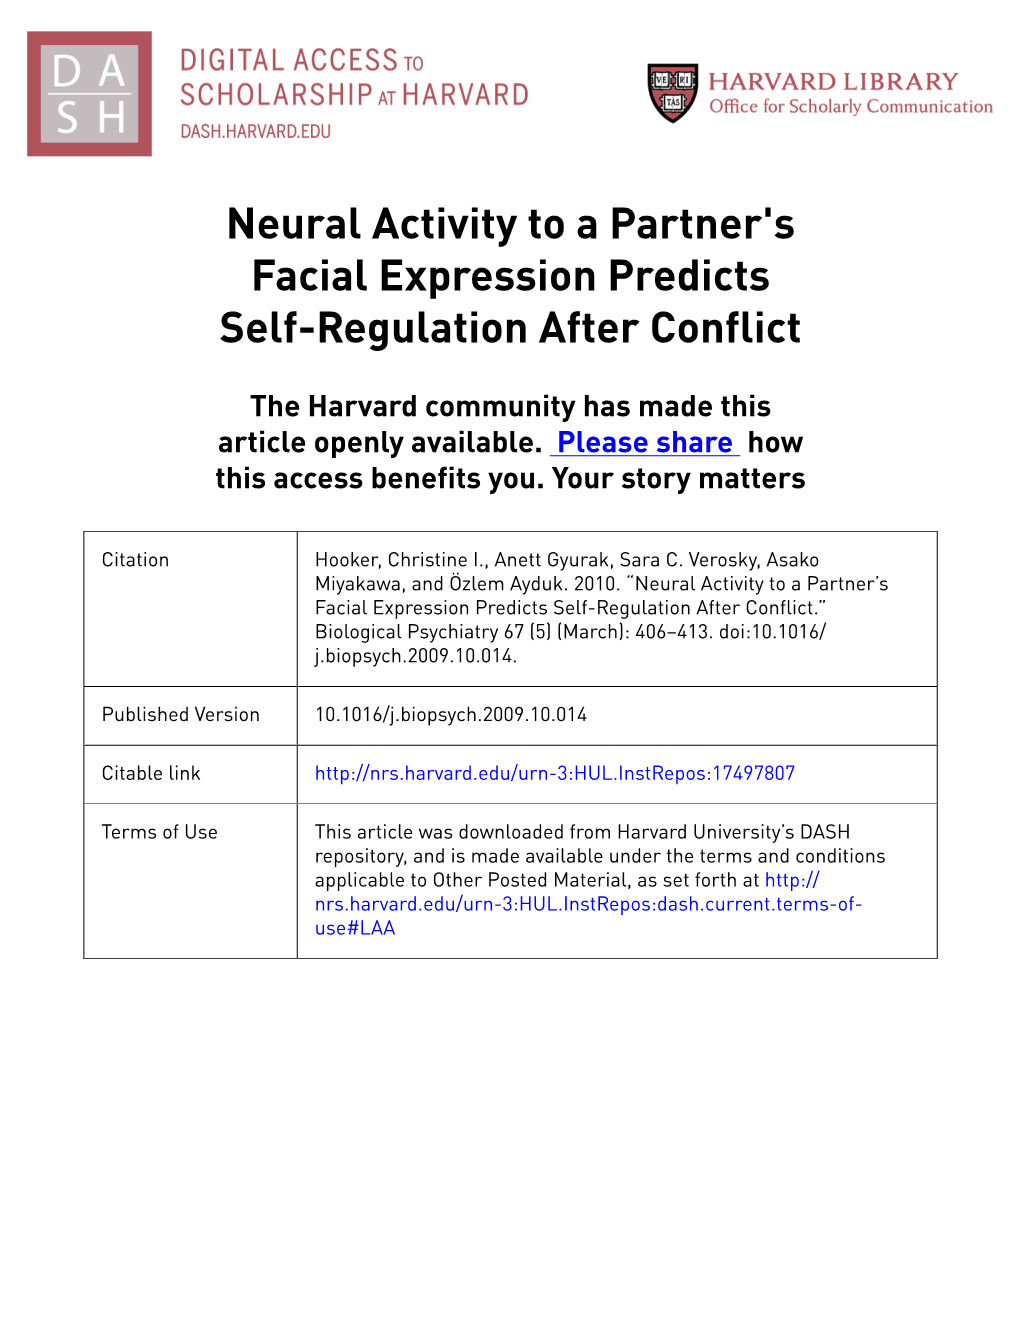 Neural Activity to a Partner's Facial Expression Predicts Self-Regulation After Conflict